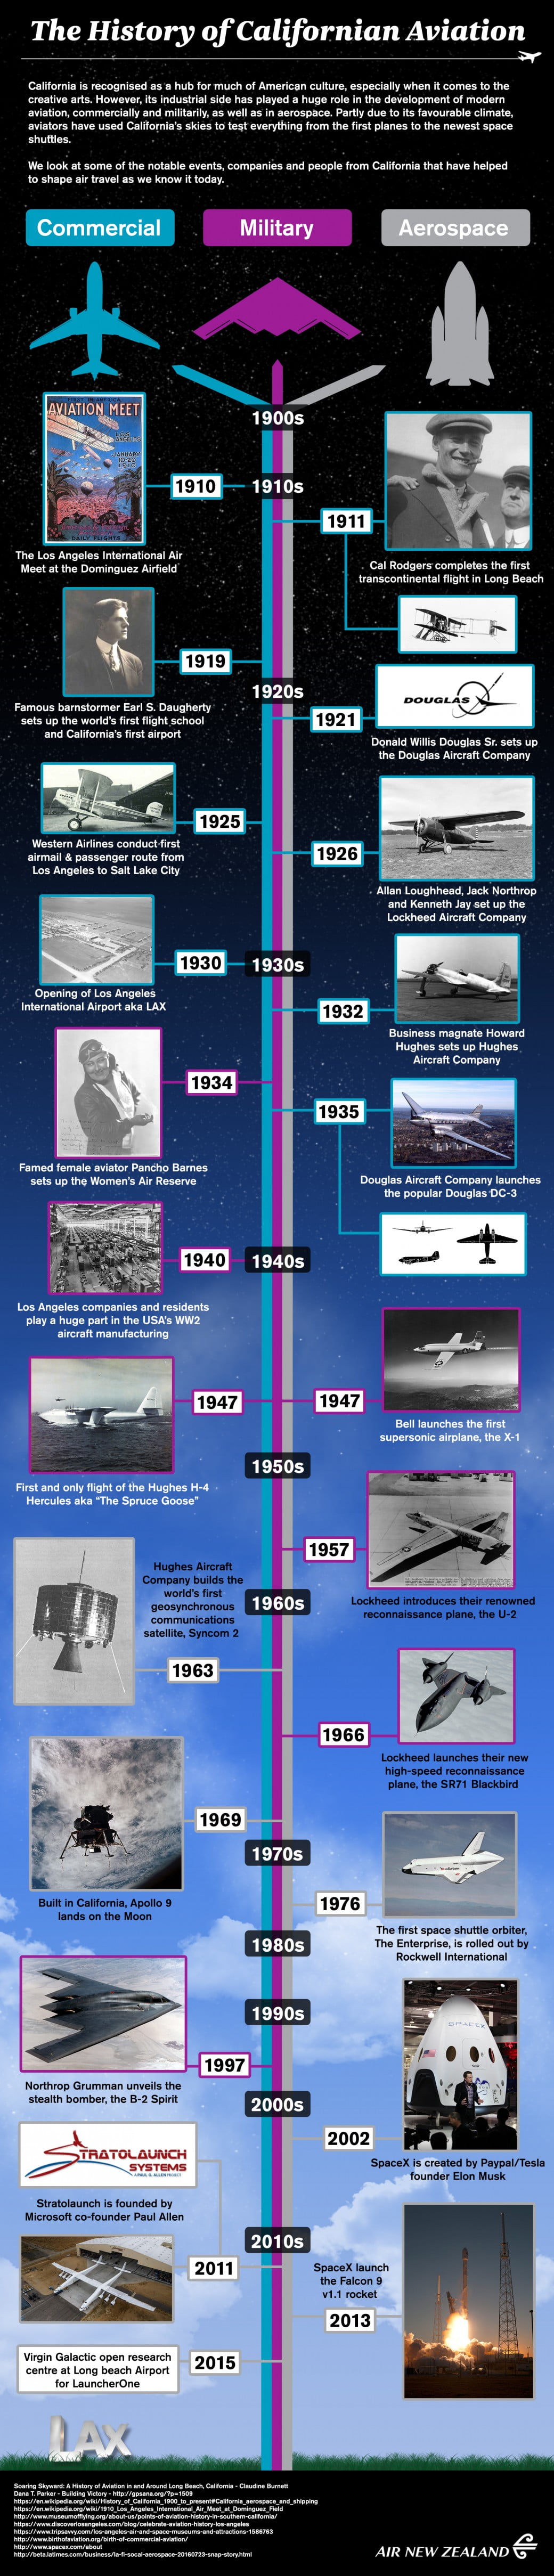 a timeline of airplanes and airplanes